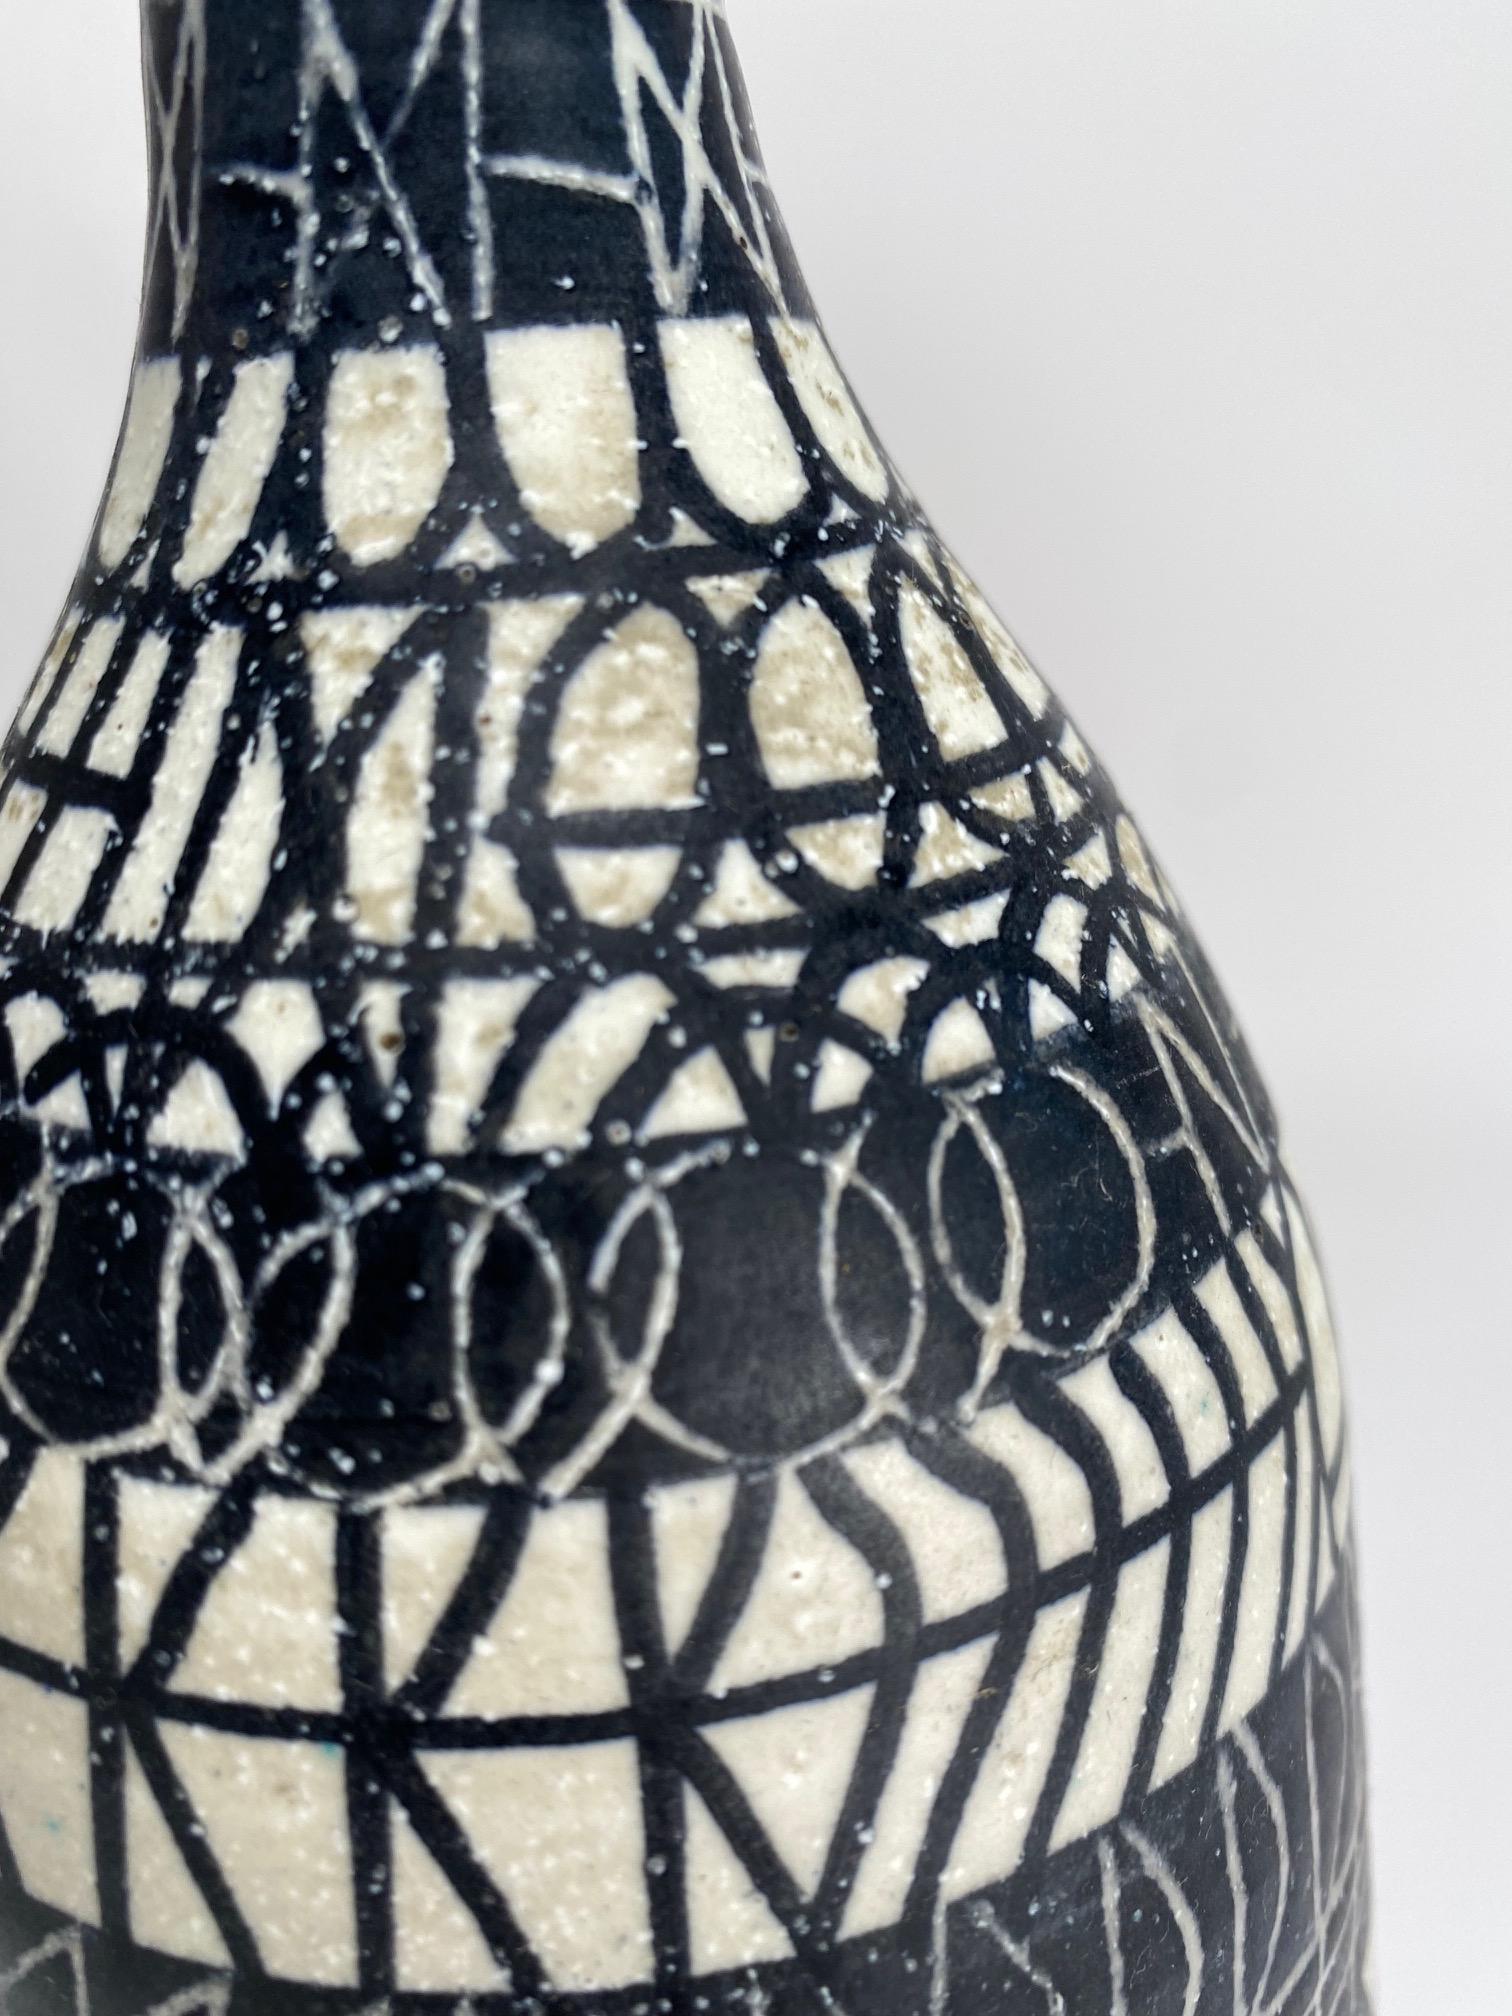 Mid-20th Century Atelier Mascarella, Large Decorated Ceramic Bottle, Italy, 1950s For Sale